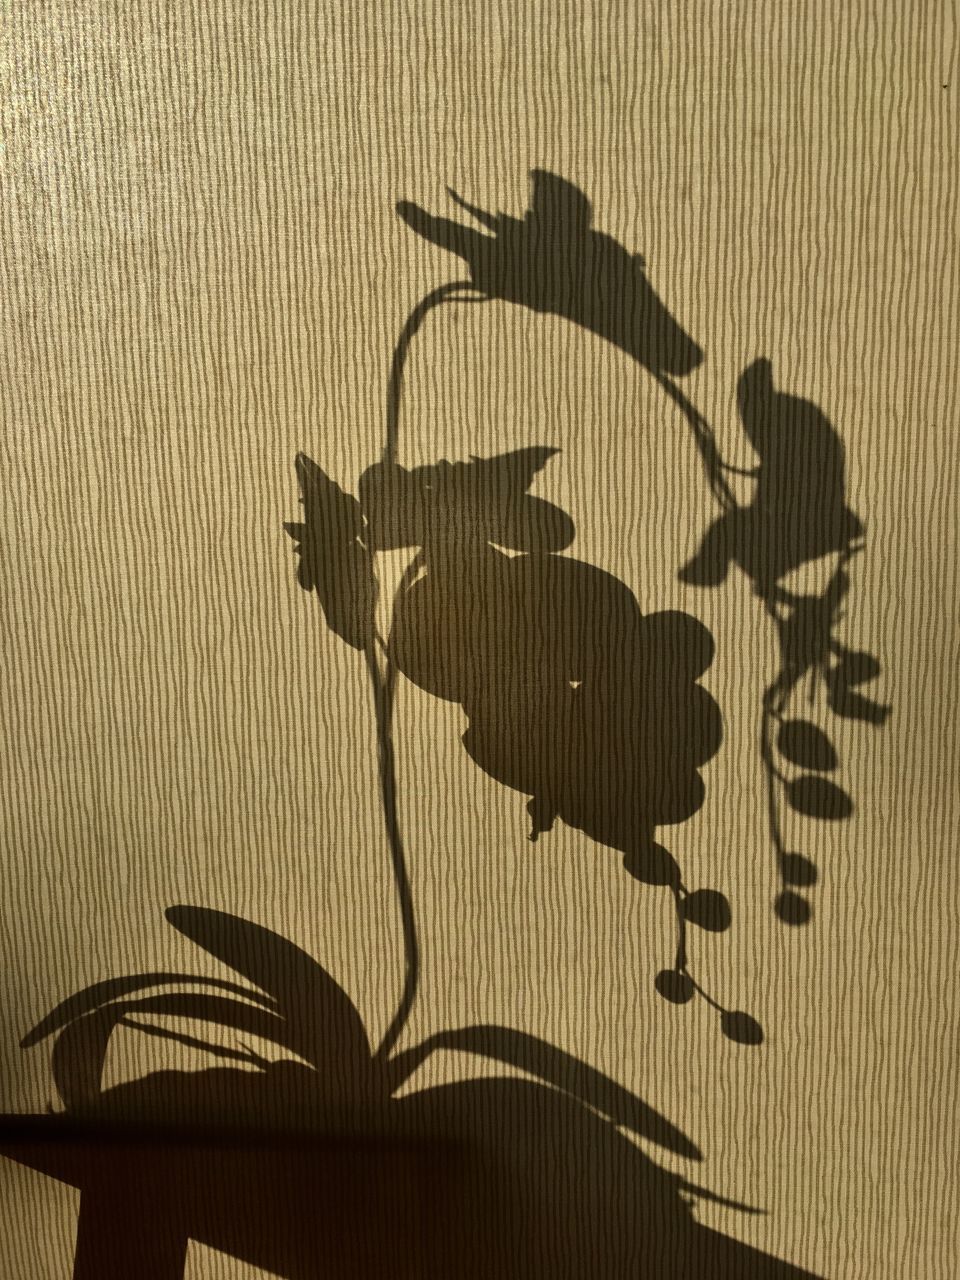 CLOSE-UP OF SHADOW AGAINST WALL